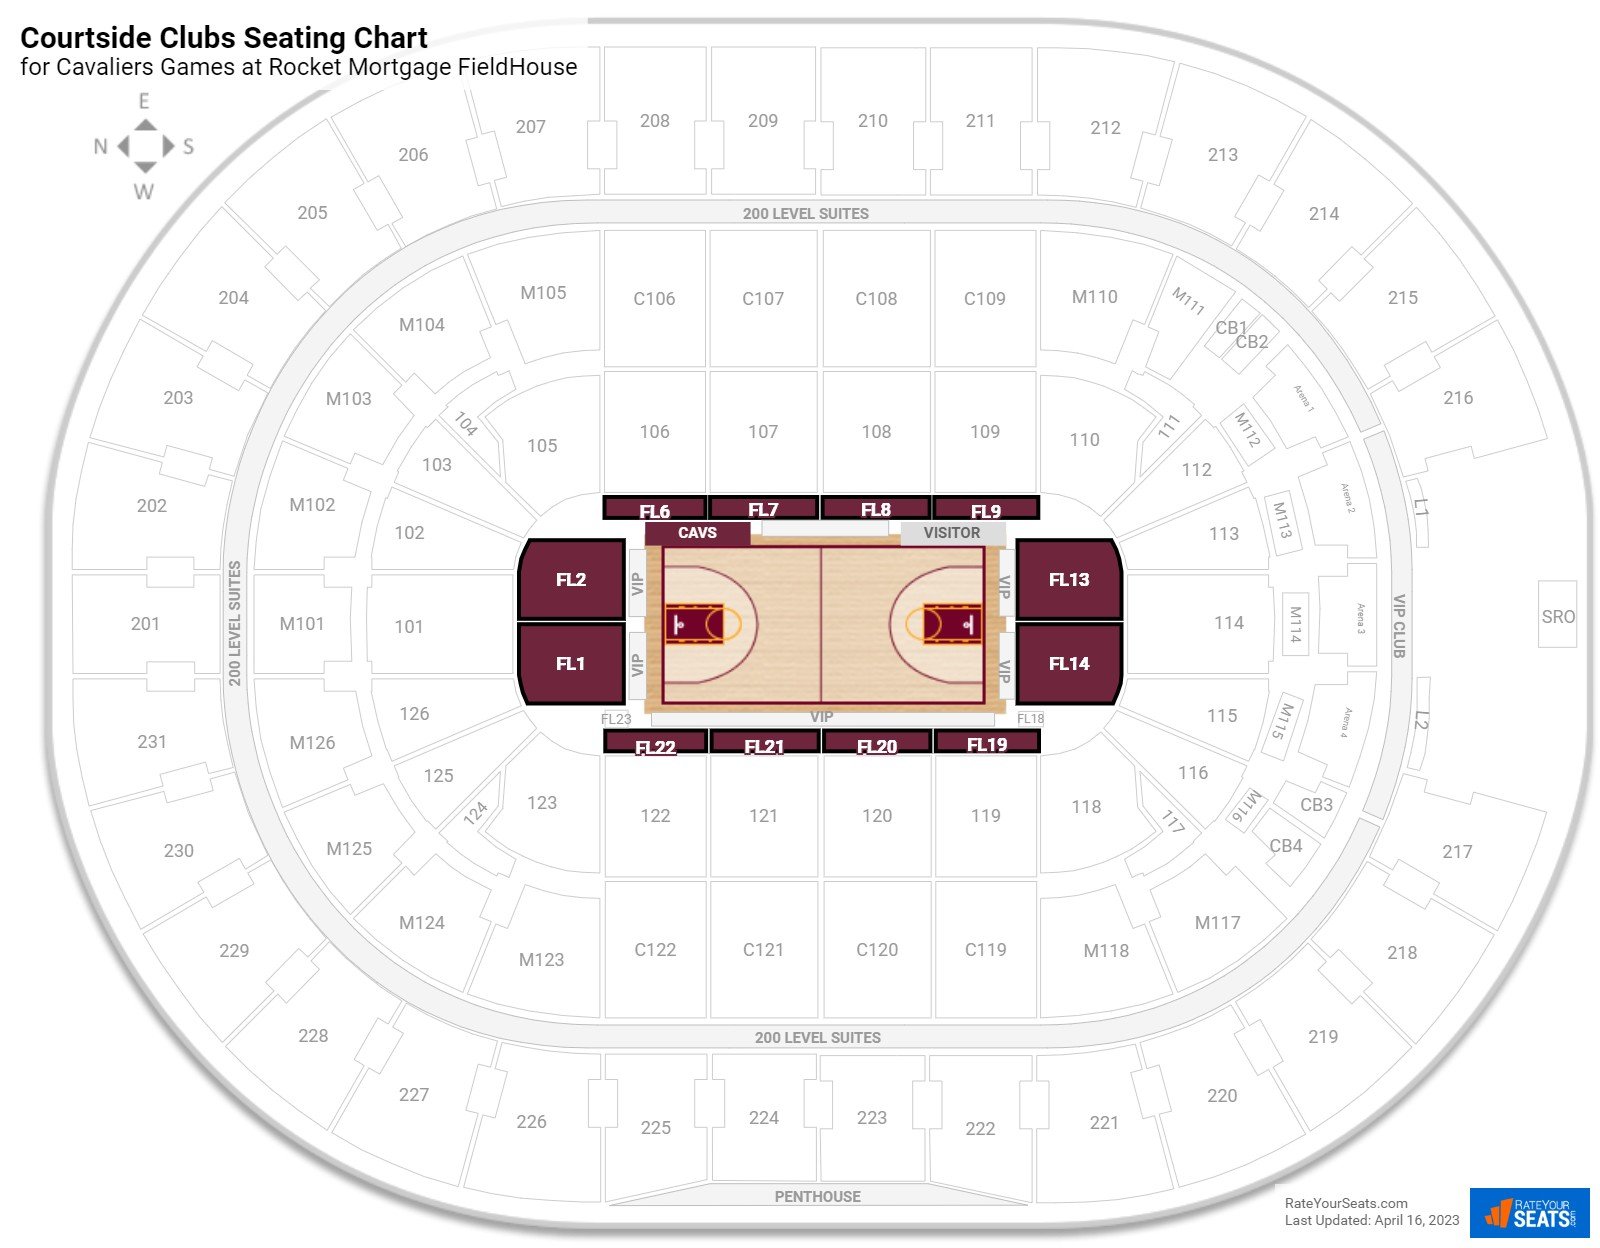 Cavaliers Courtside Clubs Seating Chart at Rocket Mortgage FieldHouse